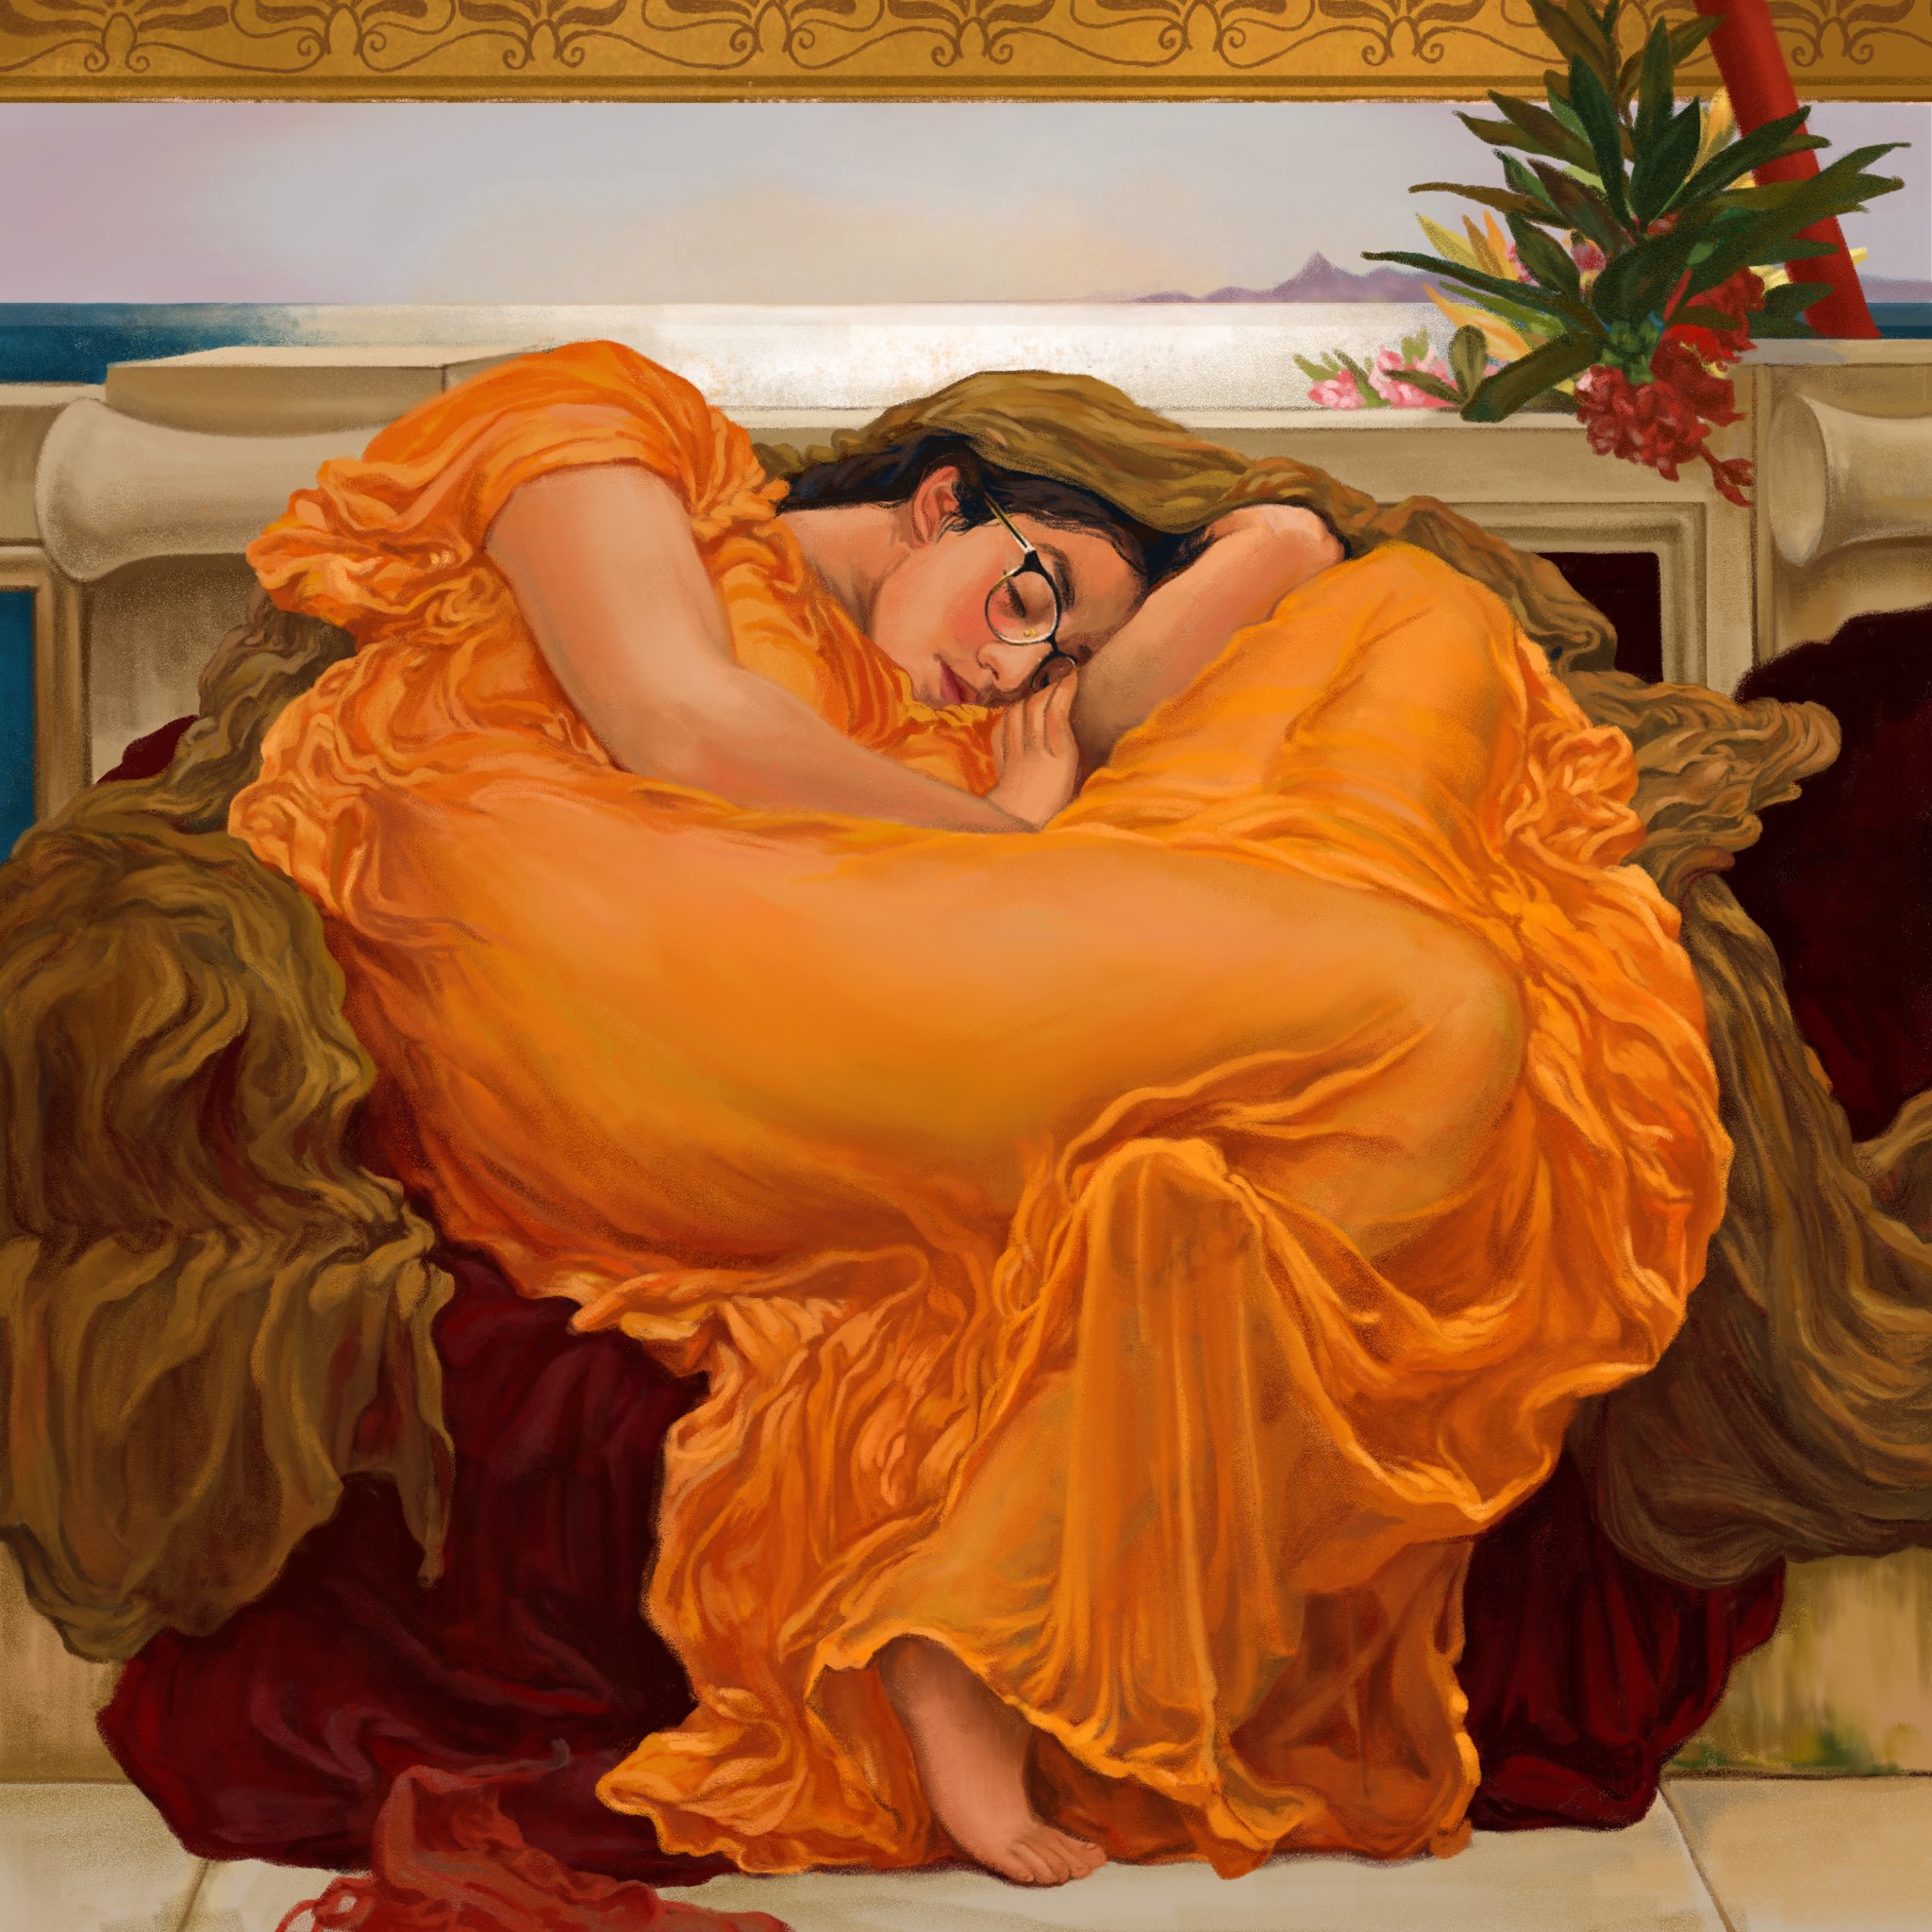 My copy of Flaming June by Frederic Leighton